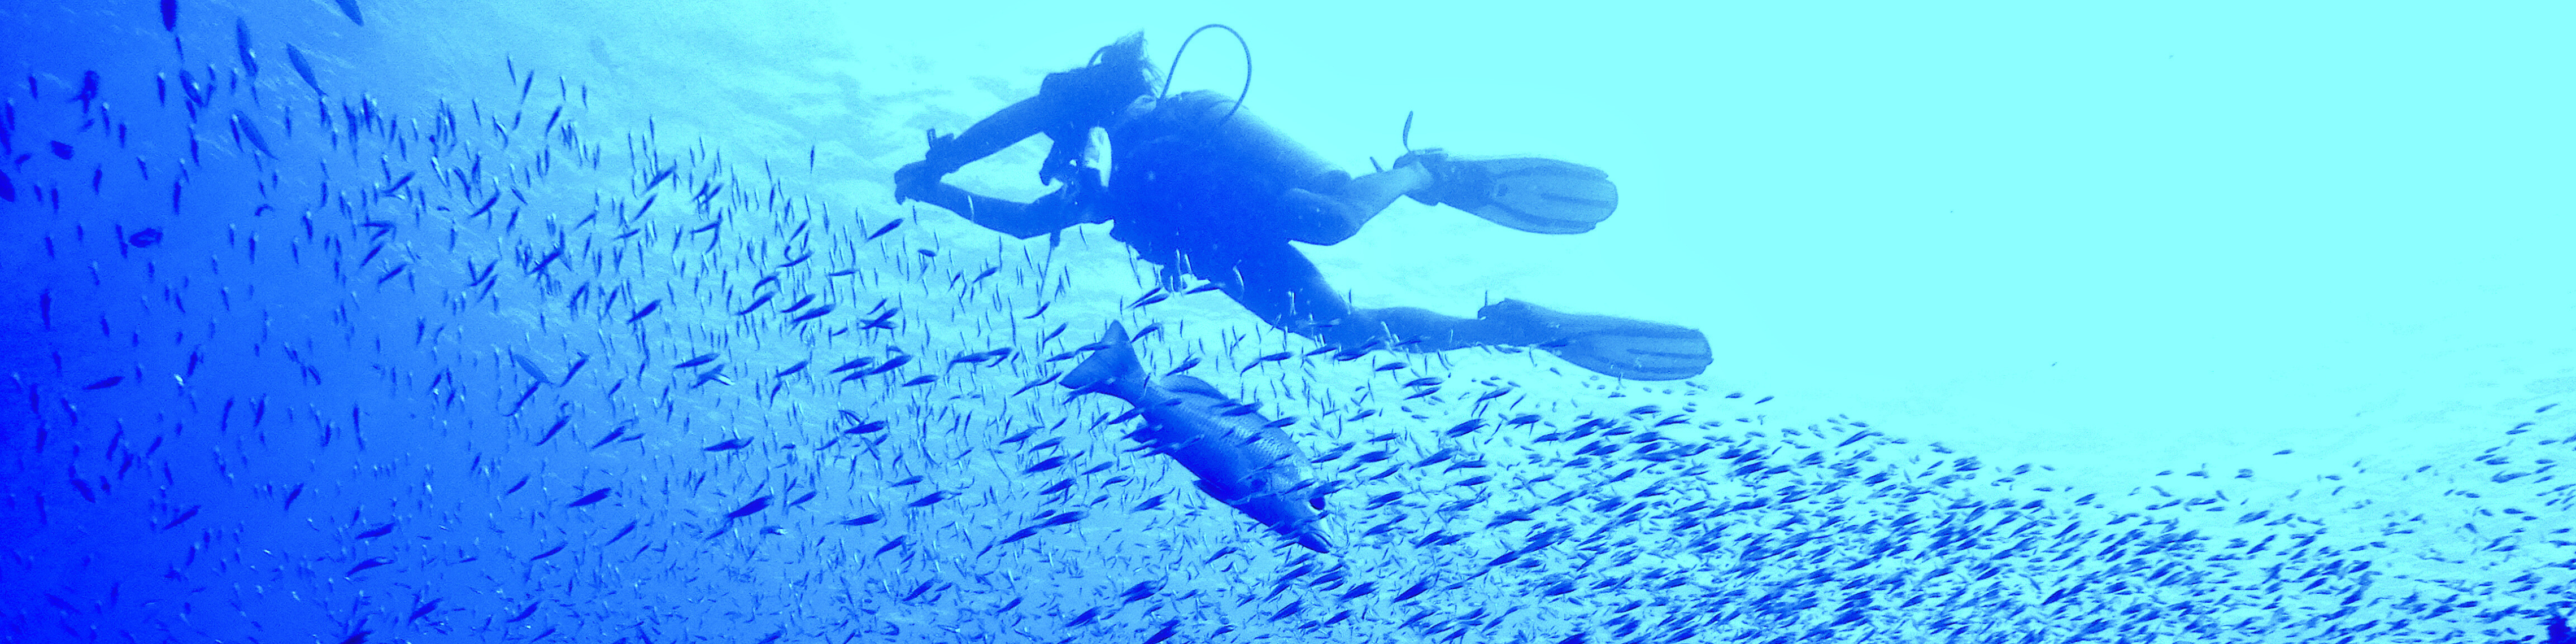 A diver Scuba Diving in Havelock